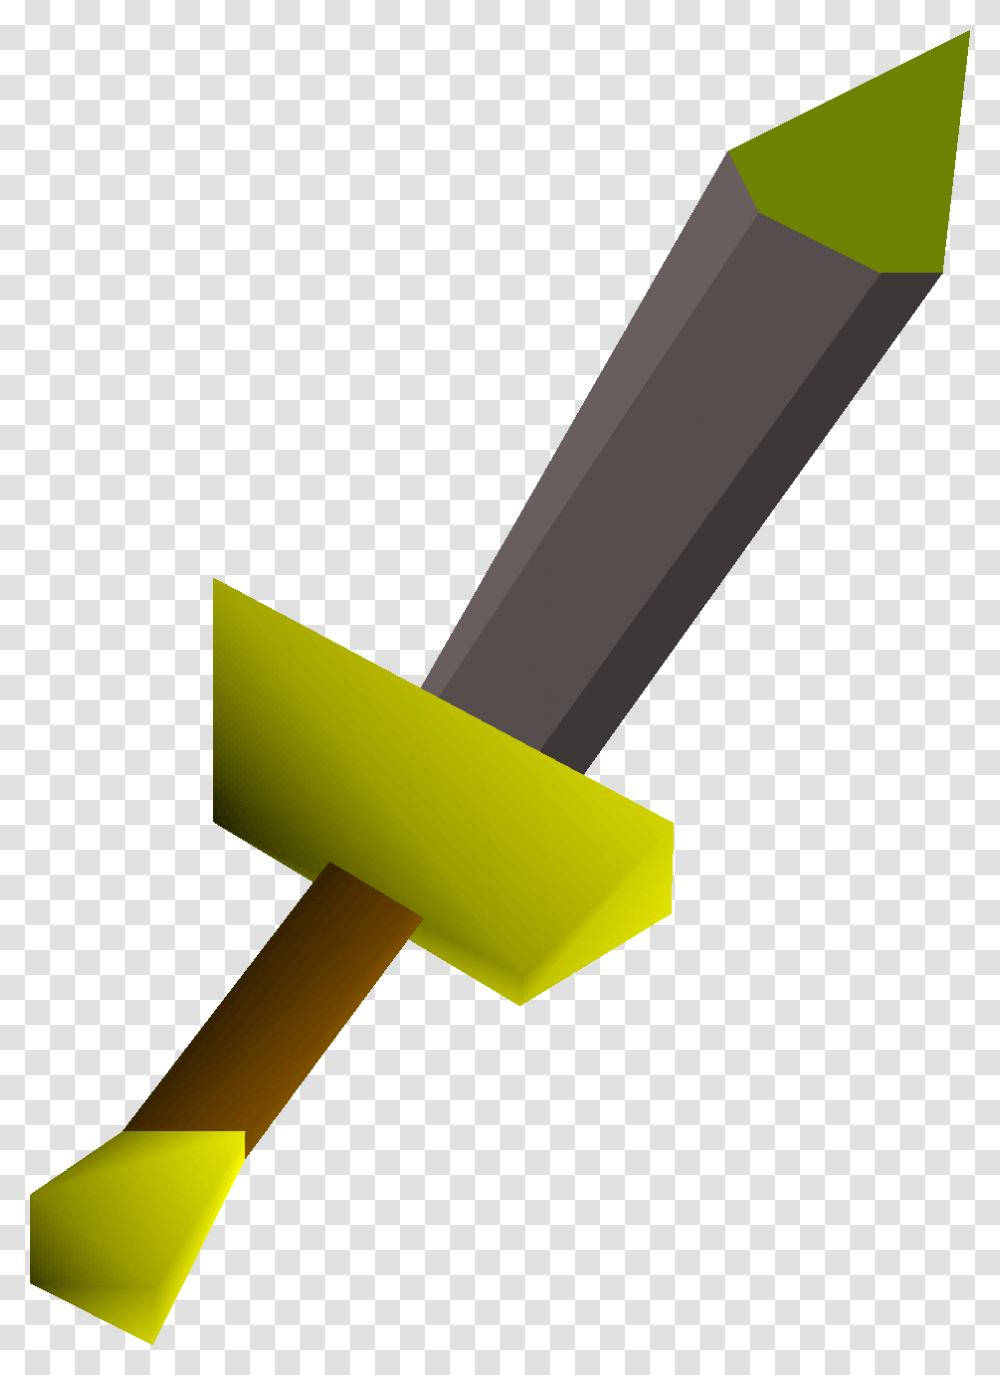 Old School Runescape Wiki Old School Runescape Dagger, Weapon, Weaponry, Blade, Knife Transparent Png